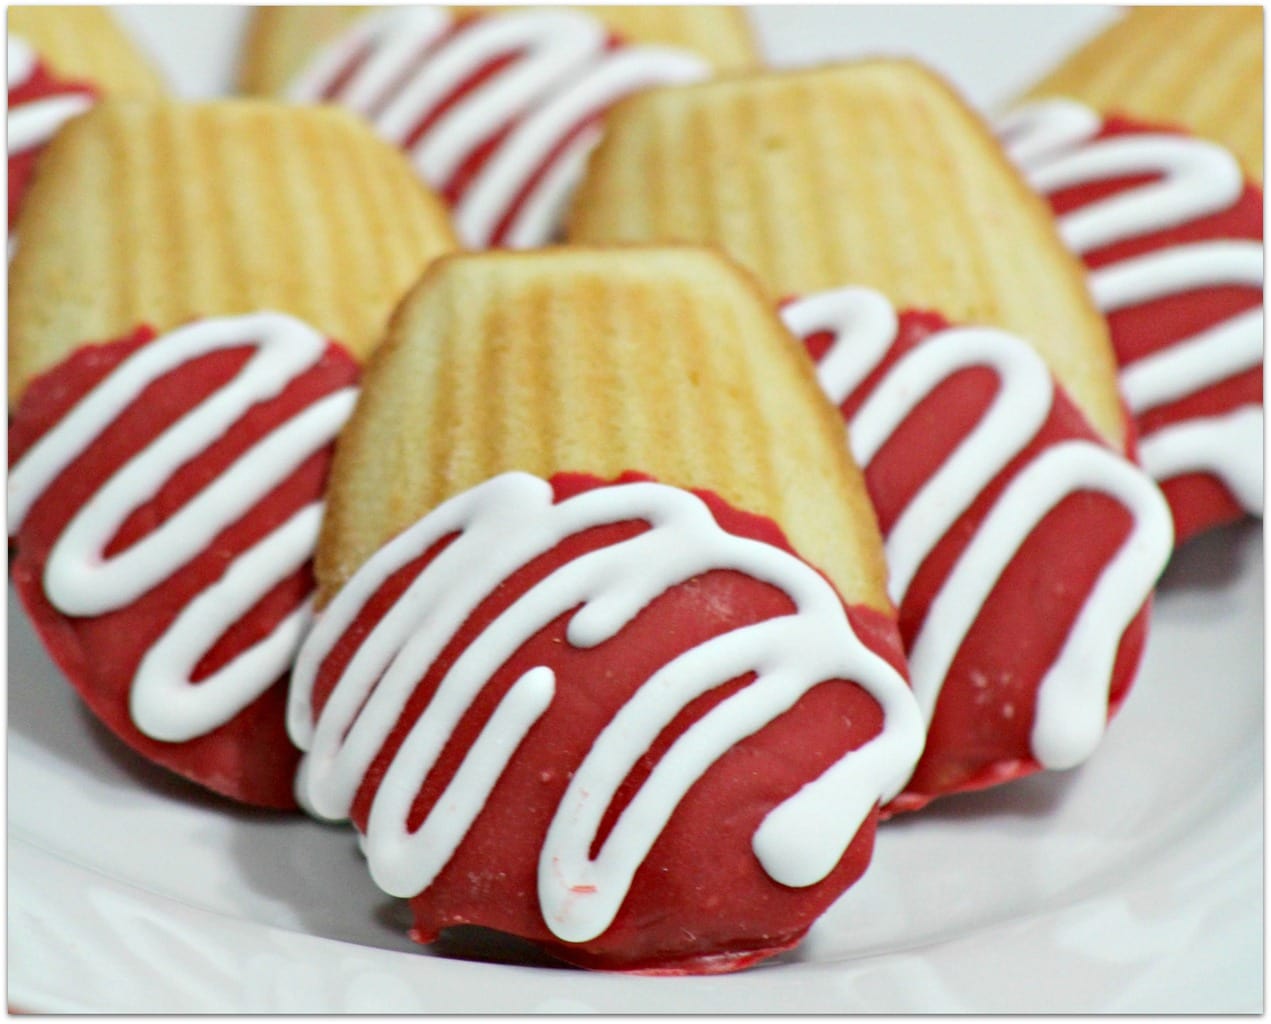 Red and white chocolate dipped  cookies on a white plate.